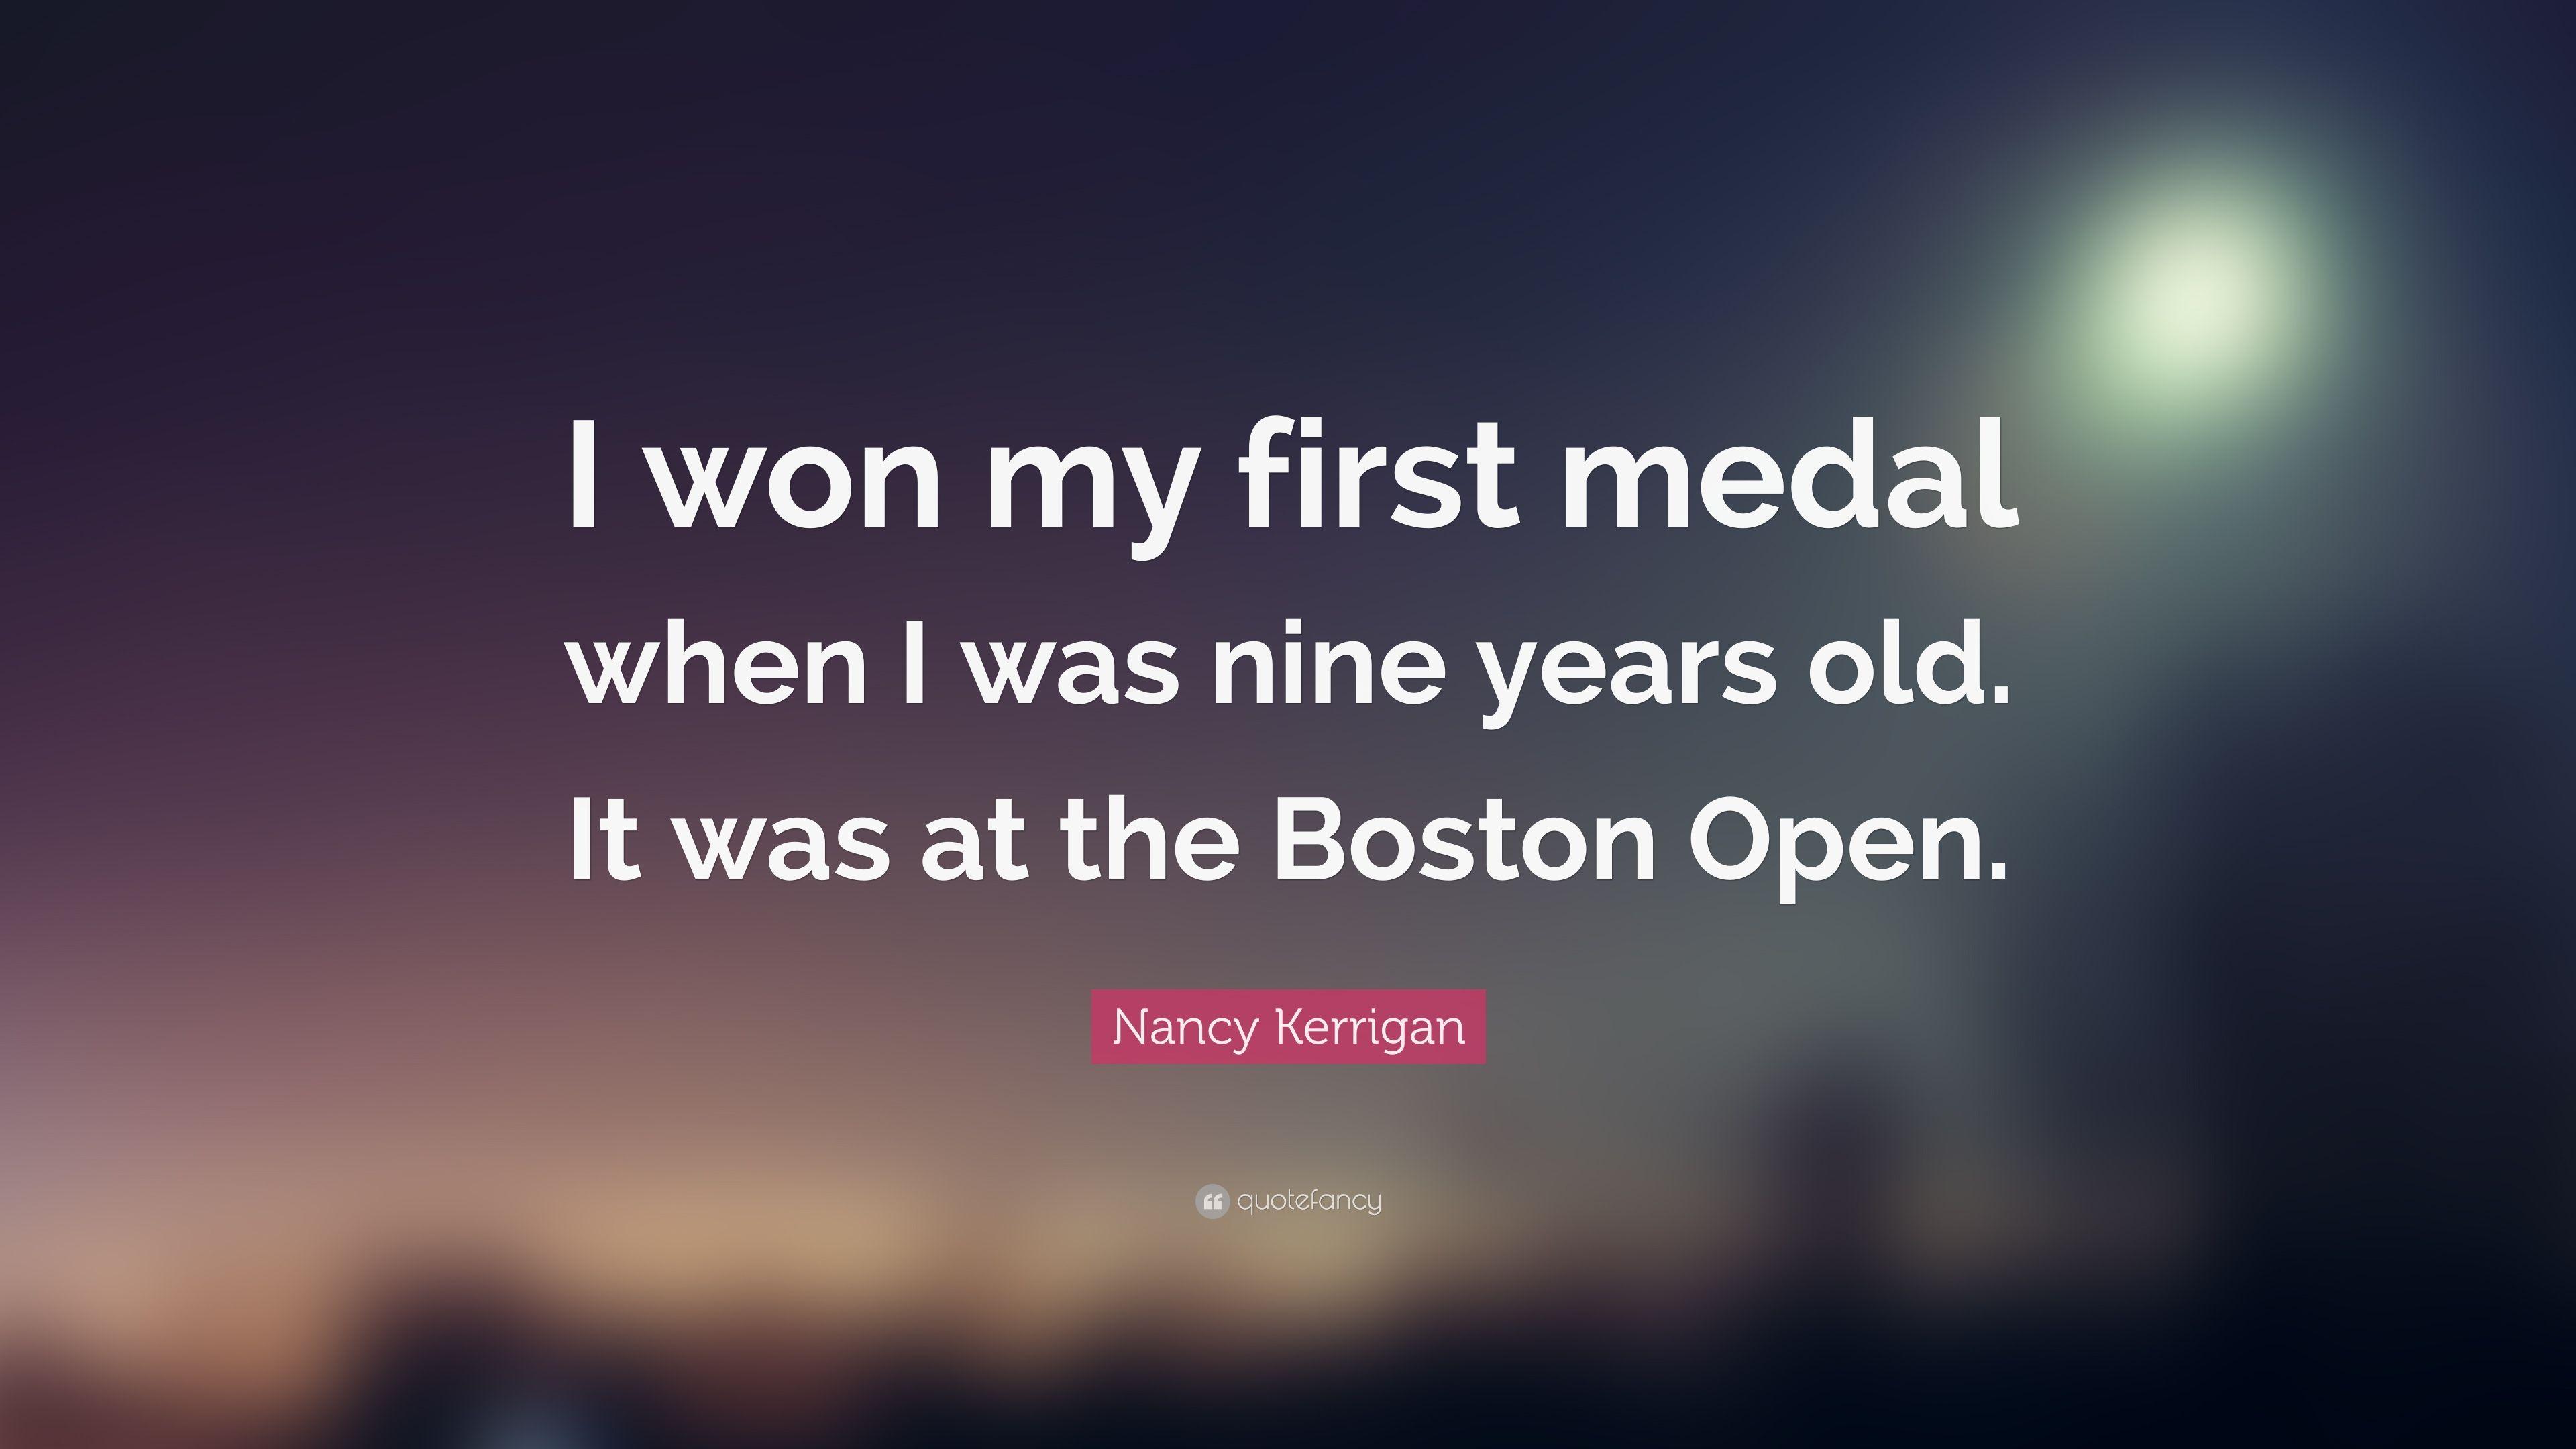 Nancy Kerrigan Quote: “I won my first medal when I was nine years